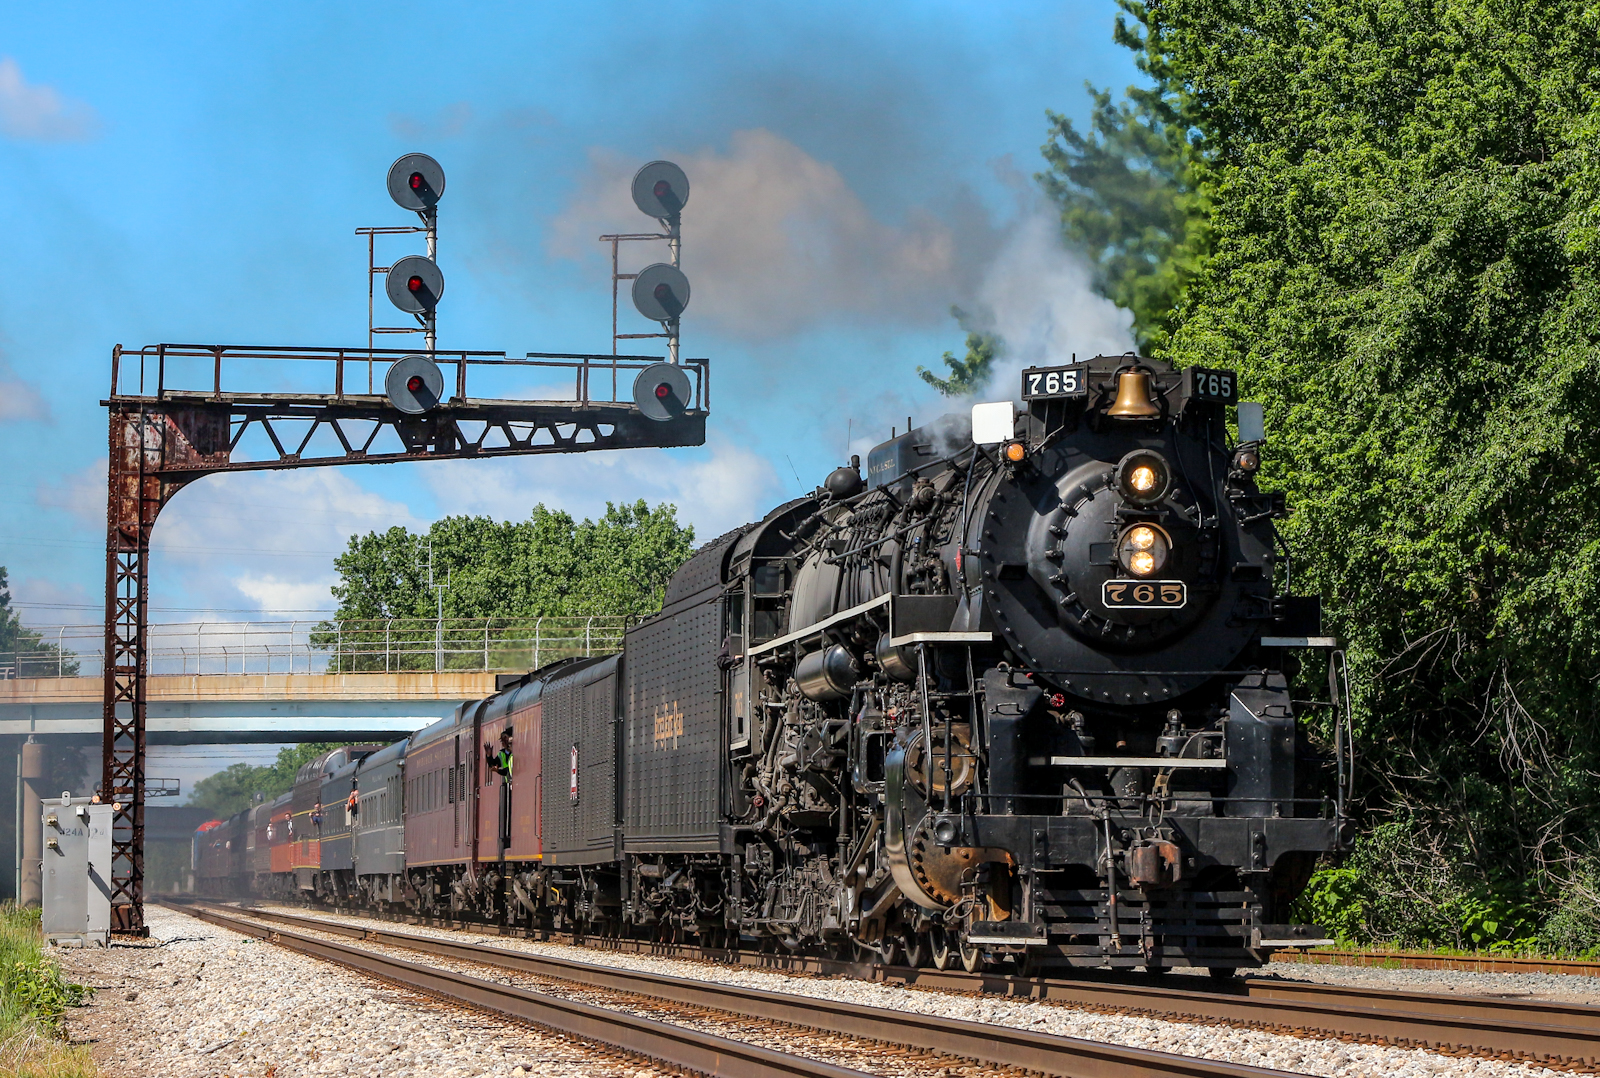 NKP 765 is a class Steam 2-8-4 and  is pictured in Robbins, Illinois, USA.  This was taken along the Joliet Subdistrict on the Metra. Photo Copyright: Lawrence Amaloo uploaded to Railroad Gallery on 11/15/2022. This photograph of NKP 765 was taken on Sunday, June 18, 2017. All Rights Reserved. 